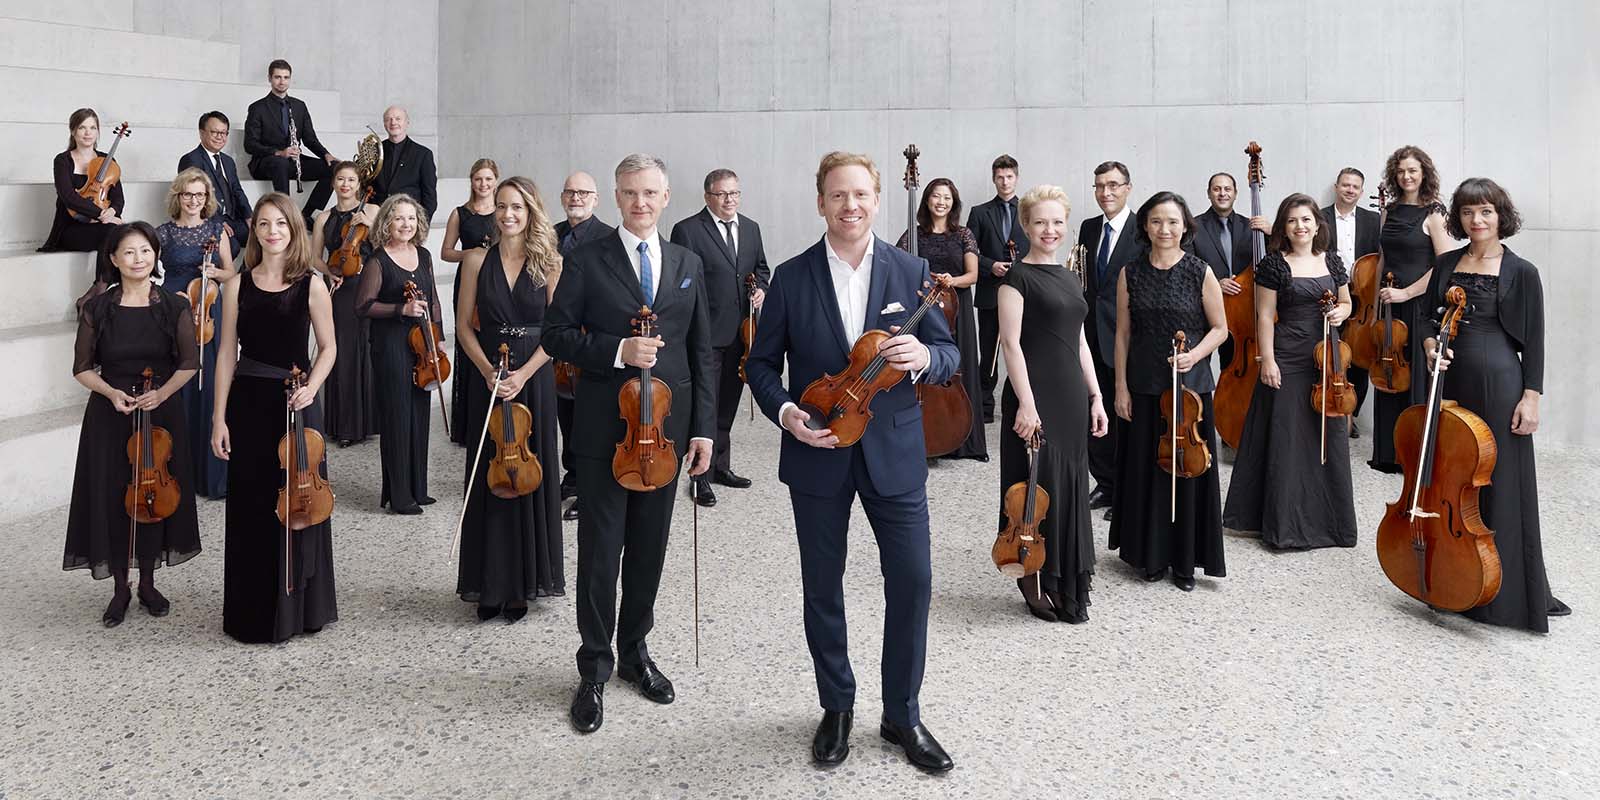 Zurich Chamber Orchestra and violinist Daniel Hope to perform Vivaldi’s “The Four Seasons”